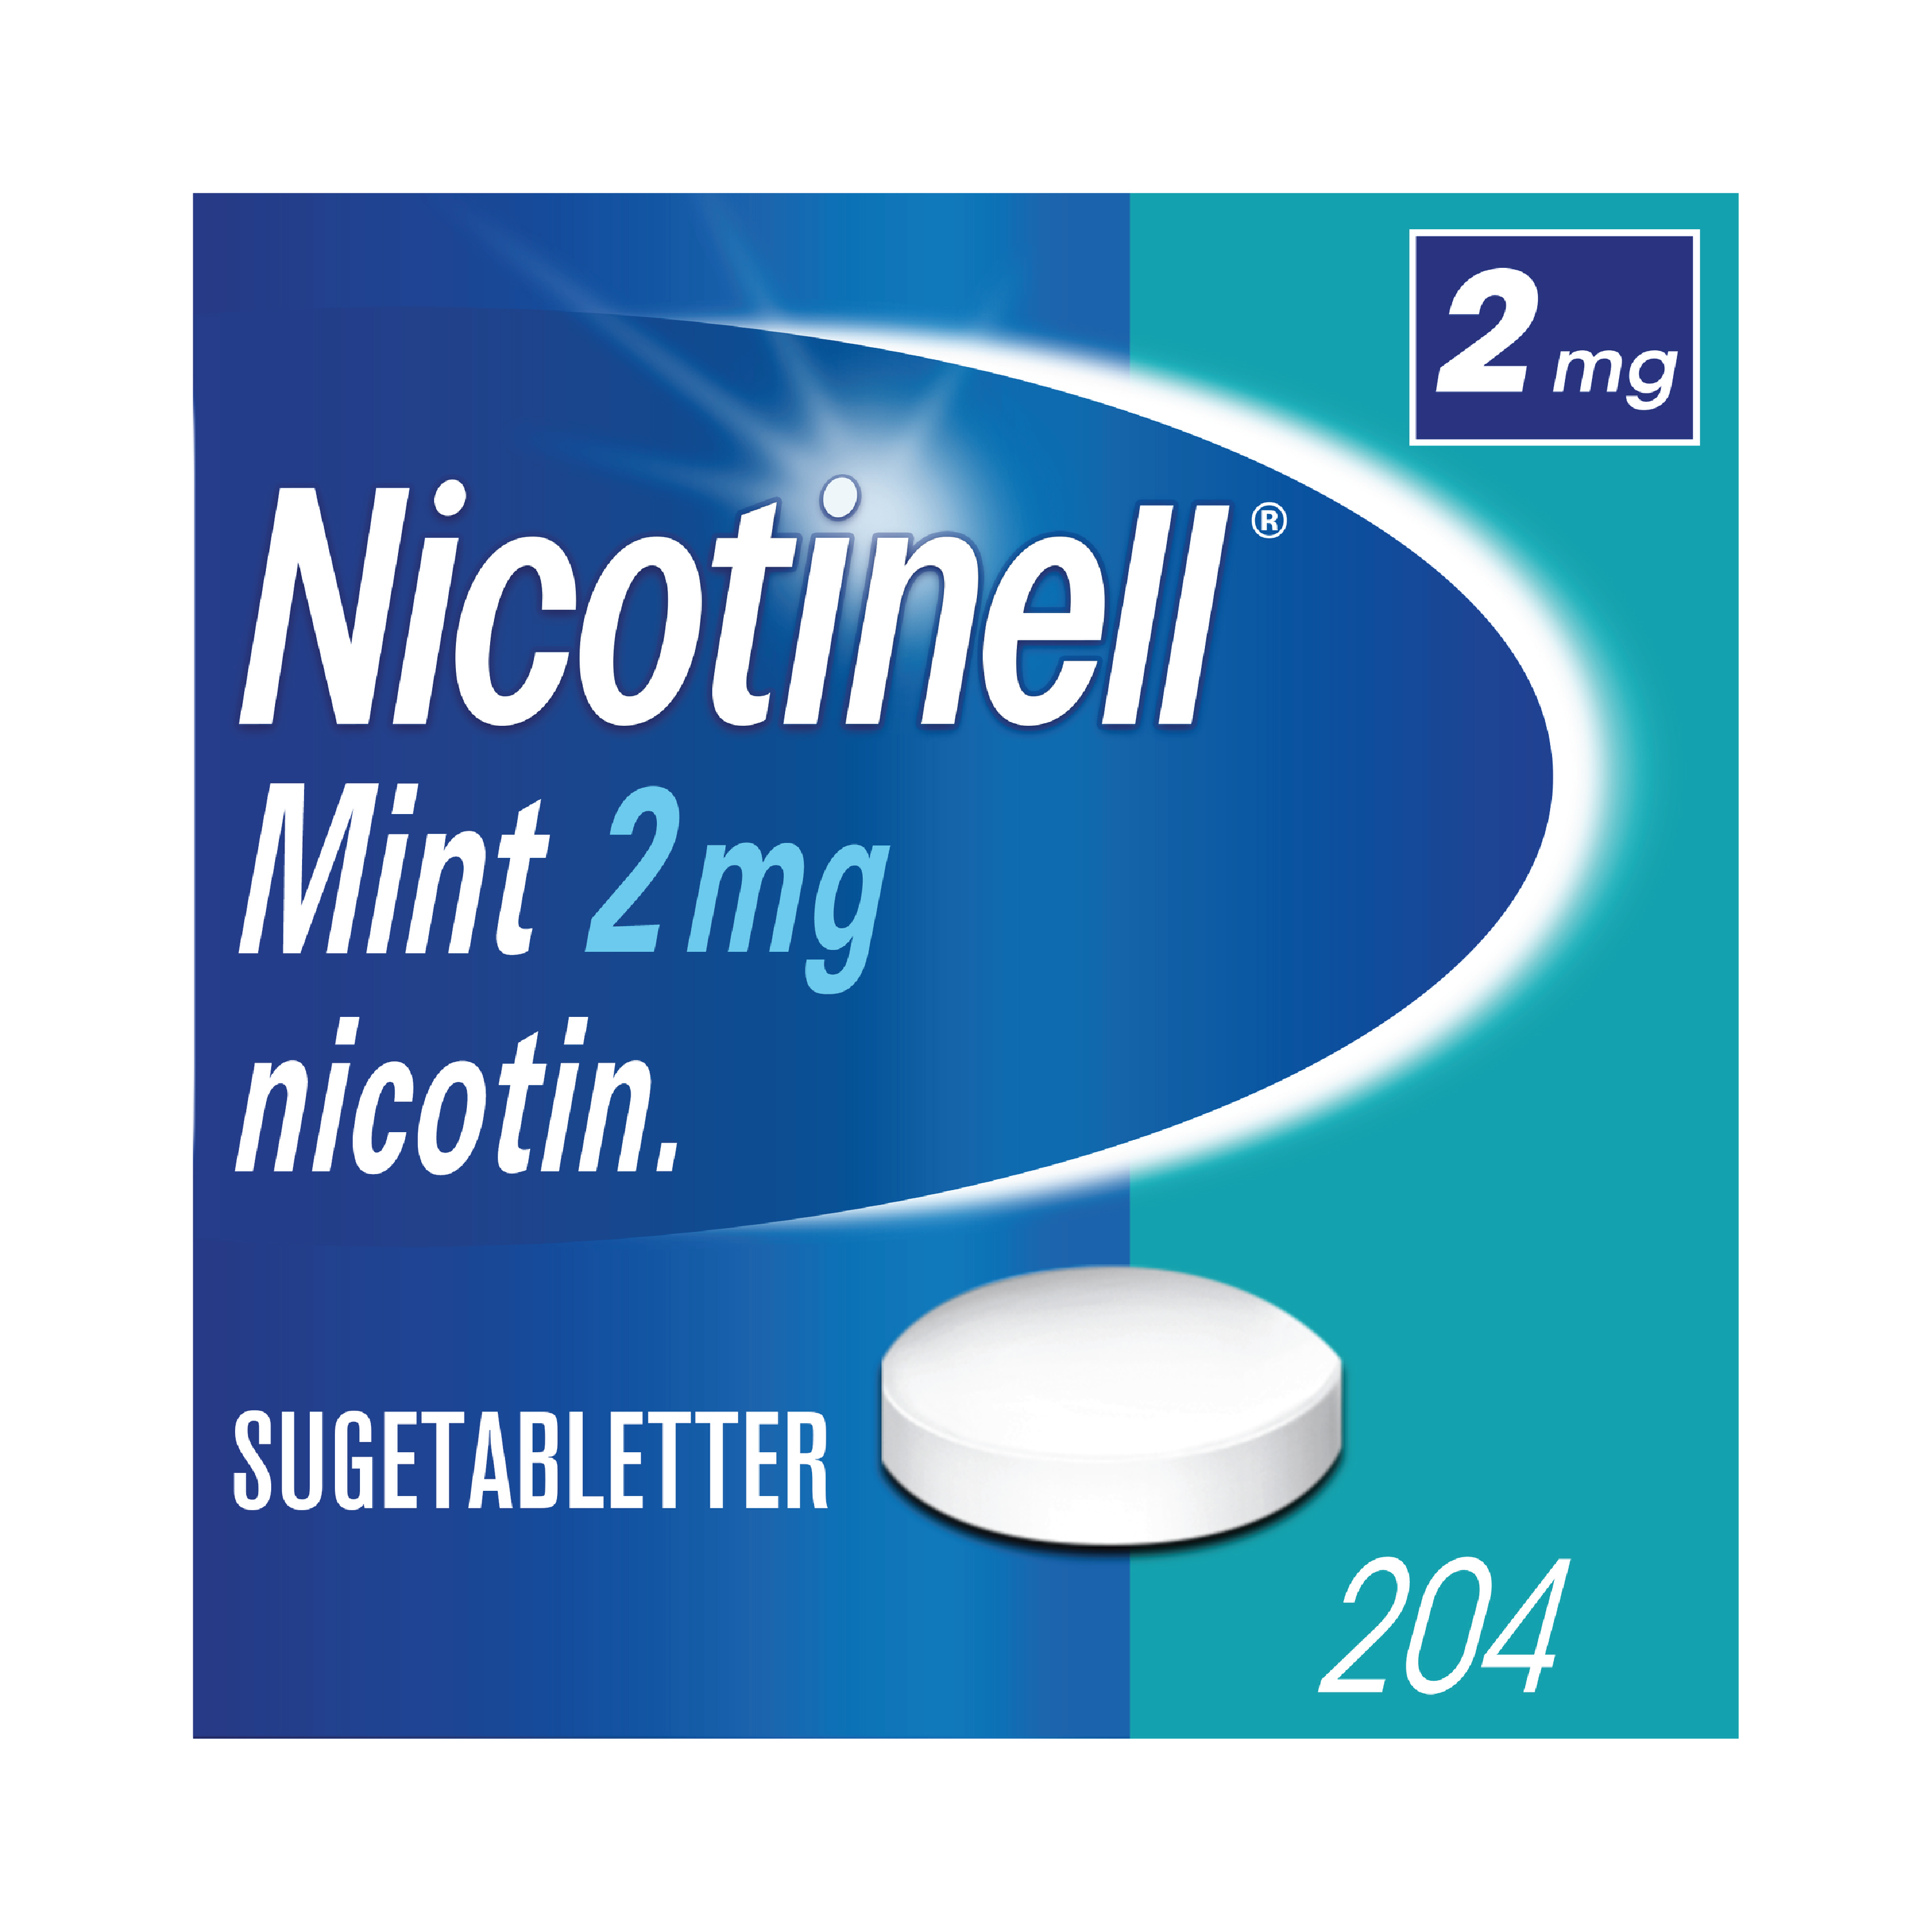 Nicotinell Sugetabletter 2mg, 204 stk.